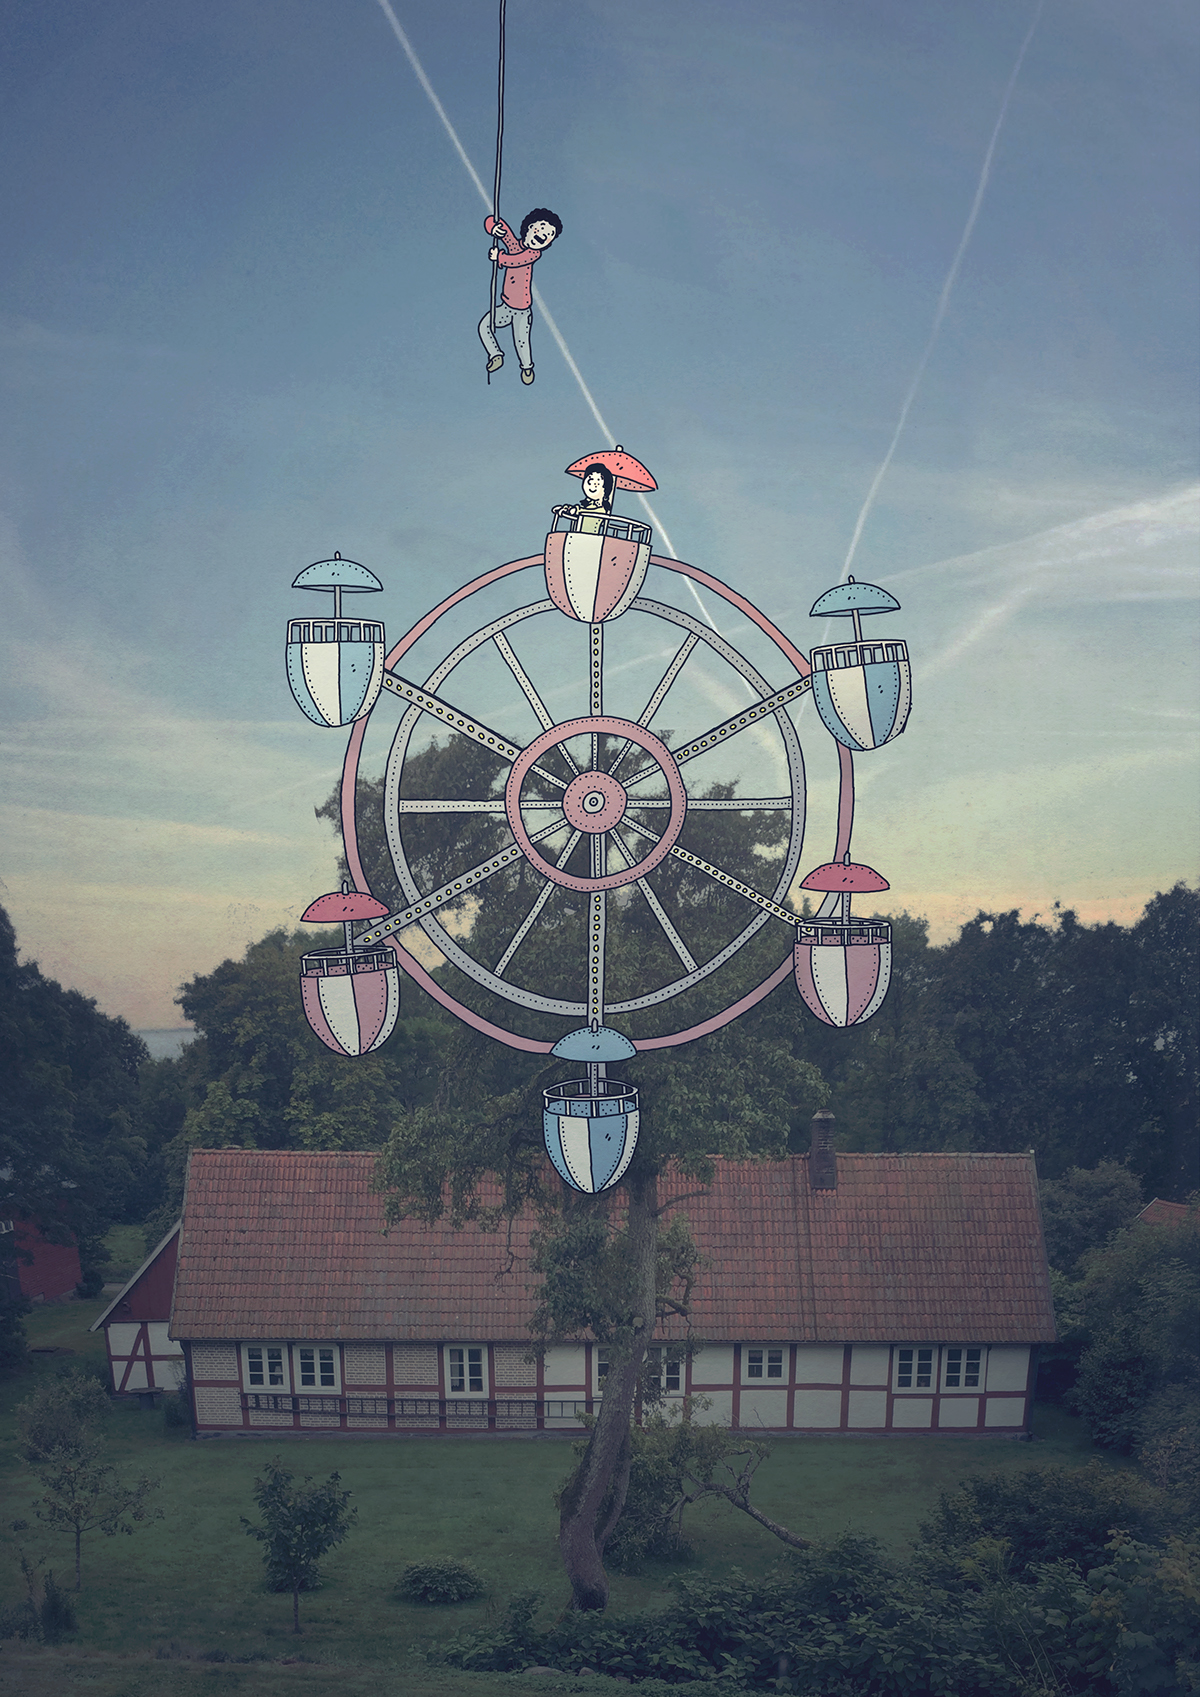 dreams photos Photo Manipulation  clouds bed robot Ferris Wheel woods chickens UFO boat Island